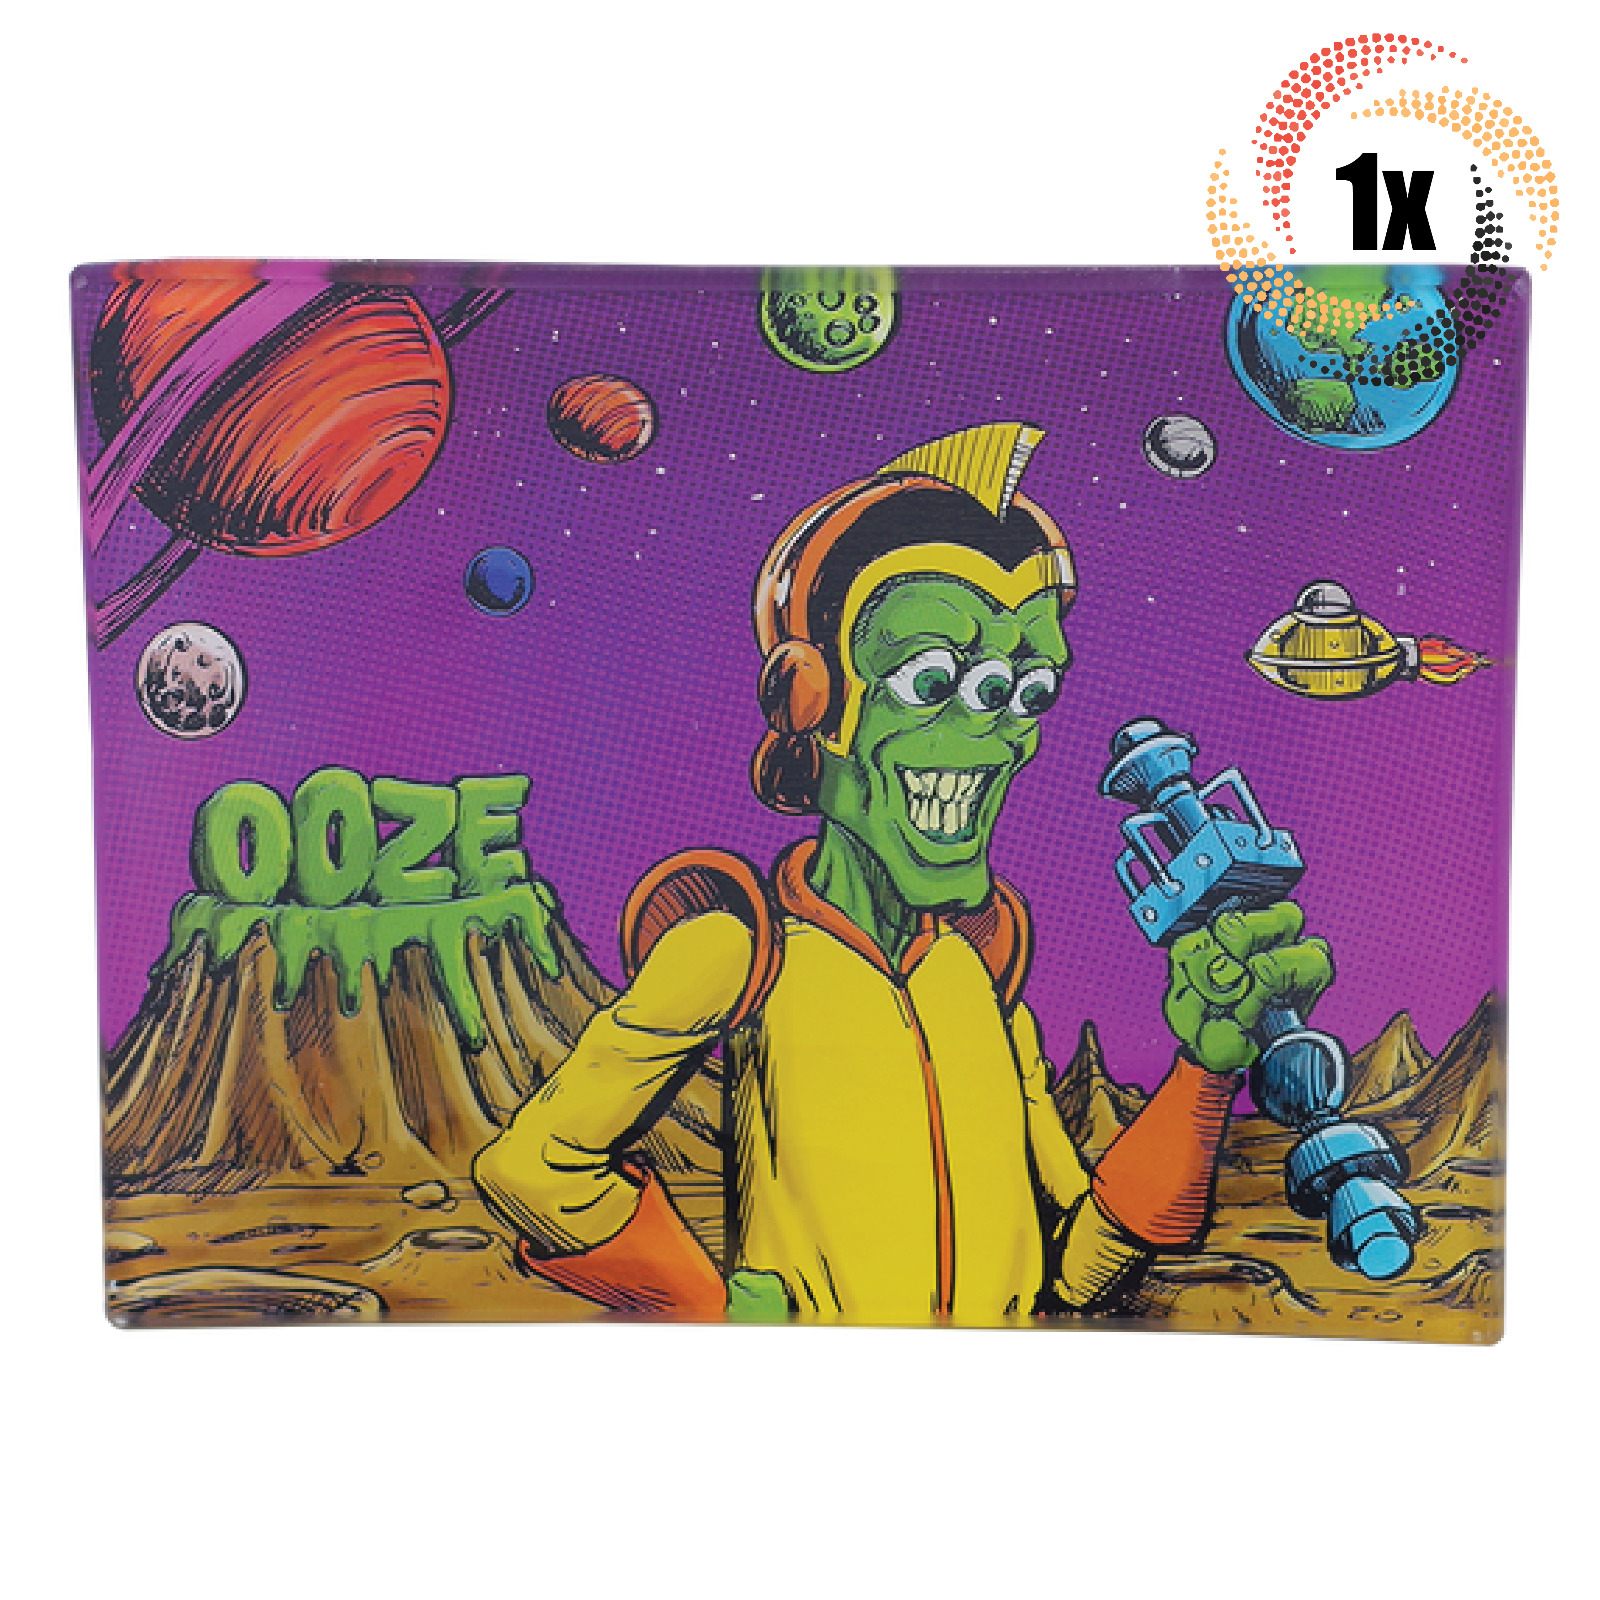 1x Tray Ooze Medium Shatter Resistant Glass Rolling Tray | Invasion Design